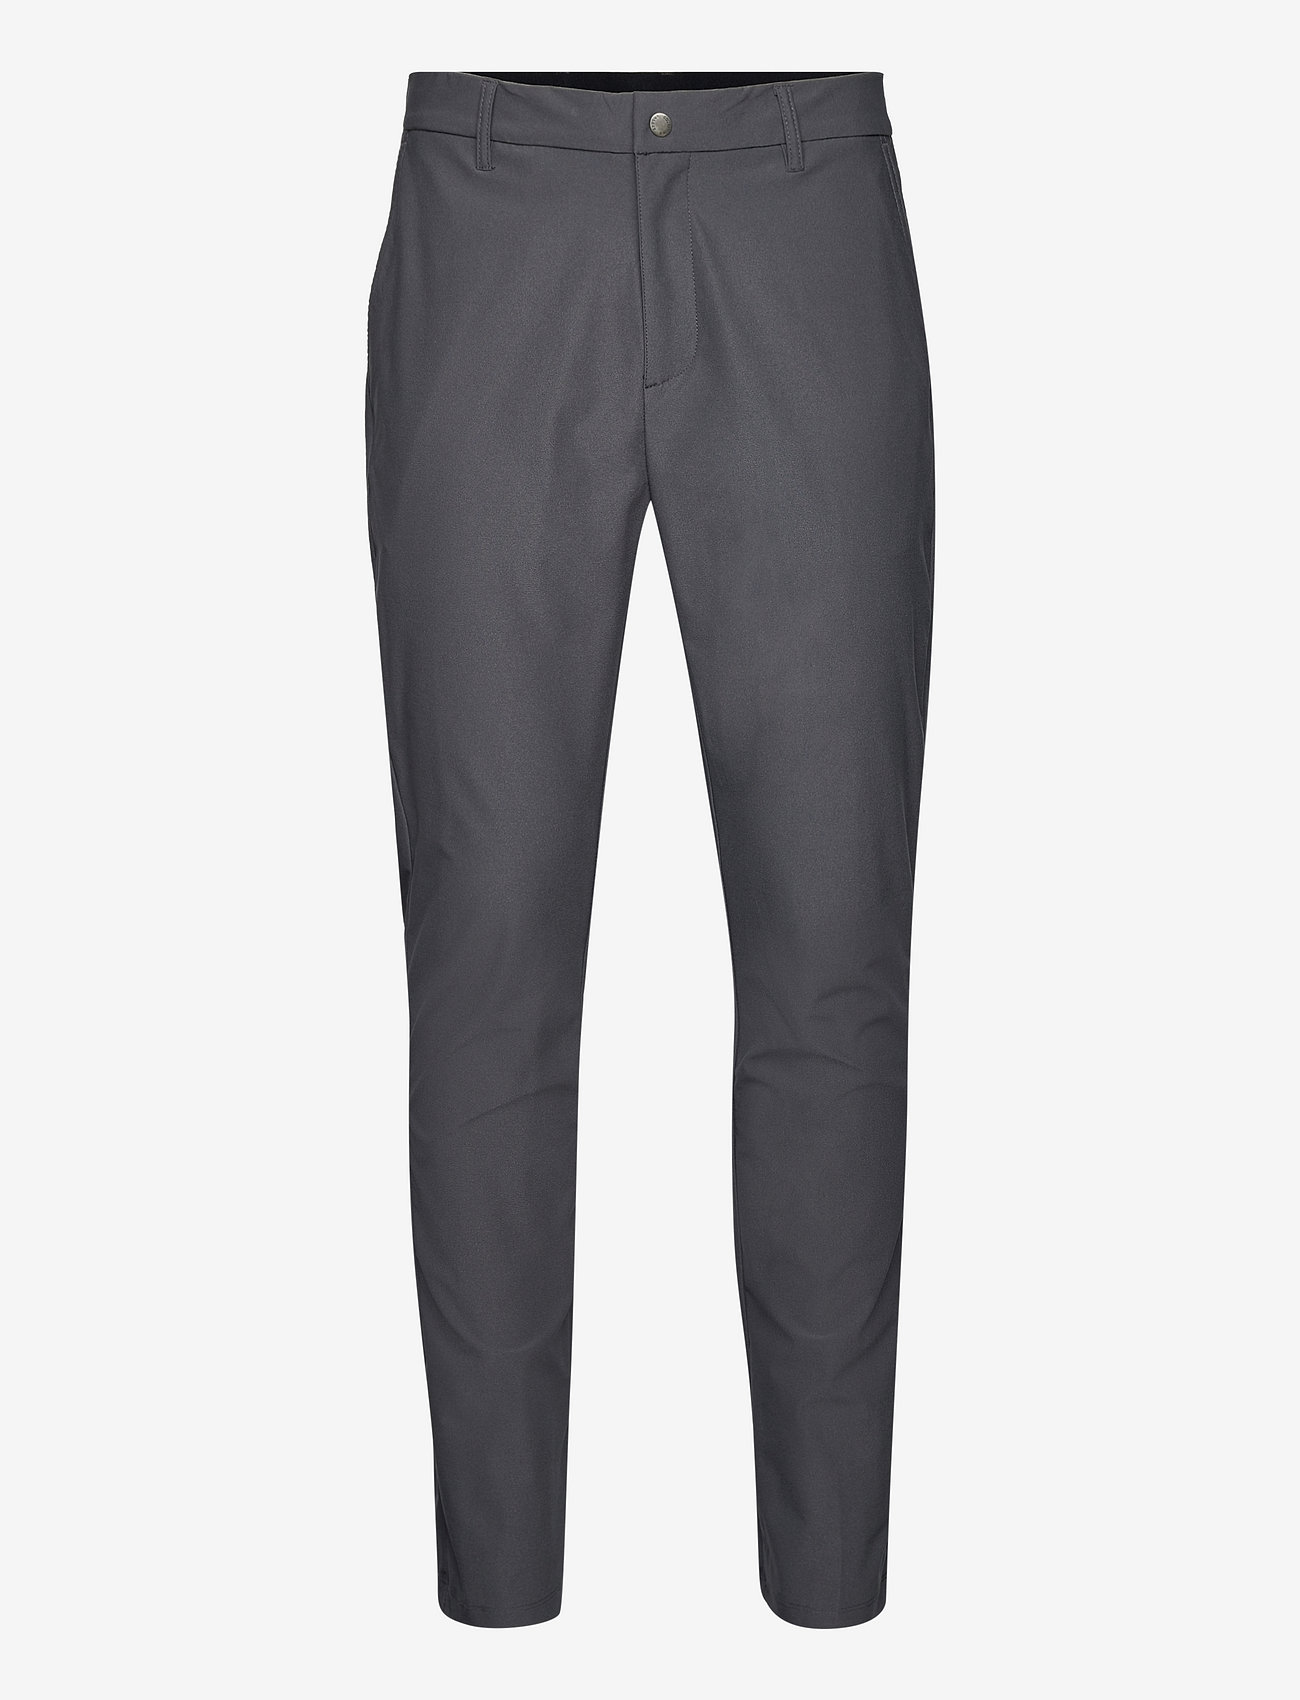 Abacus - Mens Mellion Stretch trousers - golf pants - dk.grey - 1